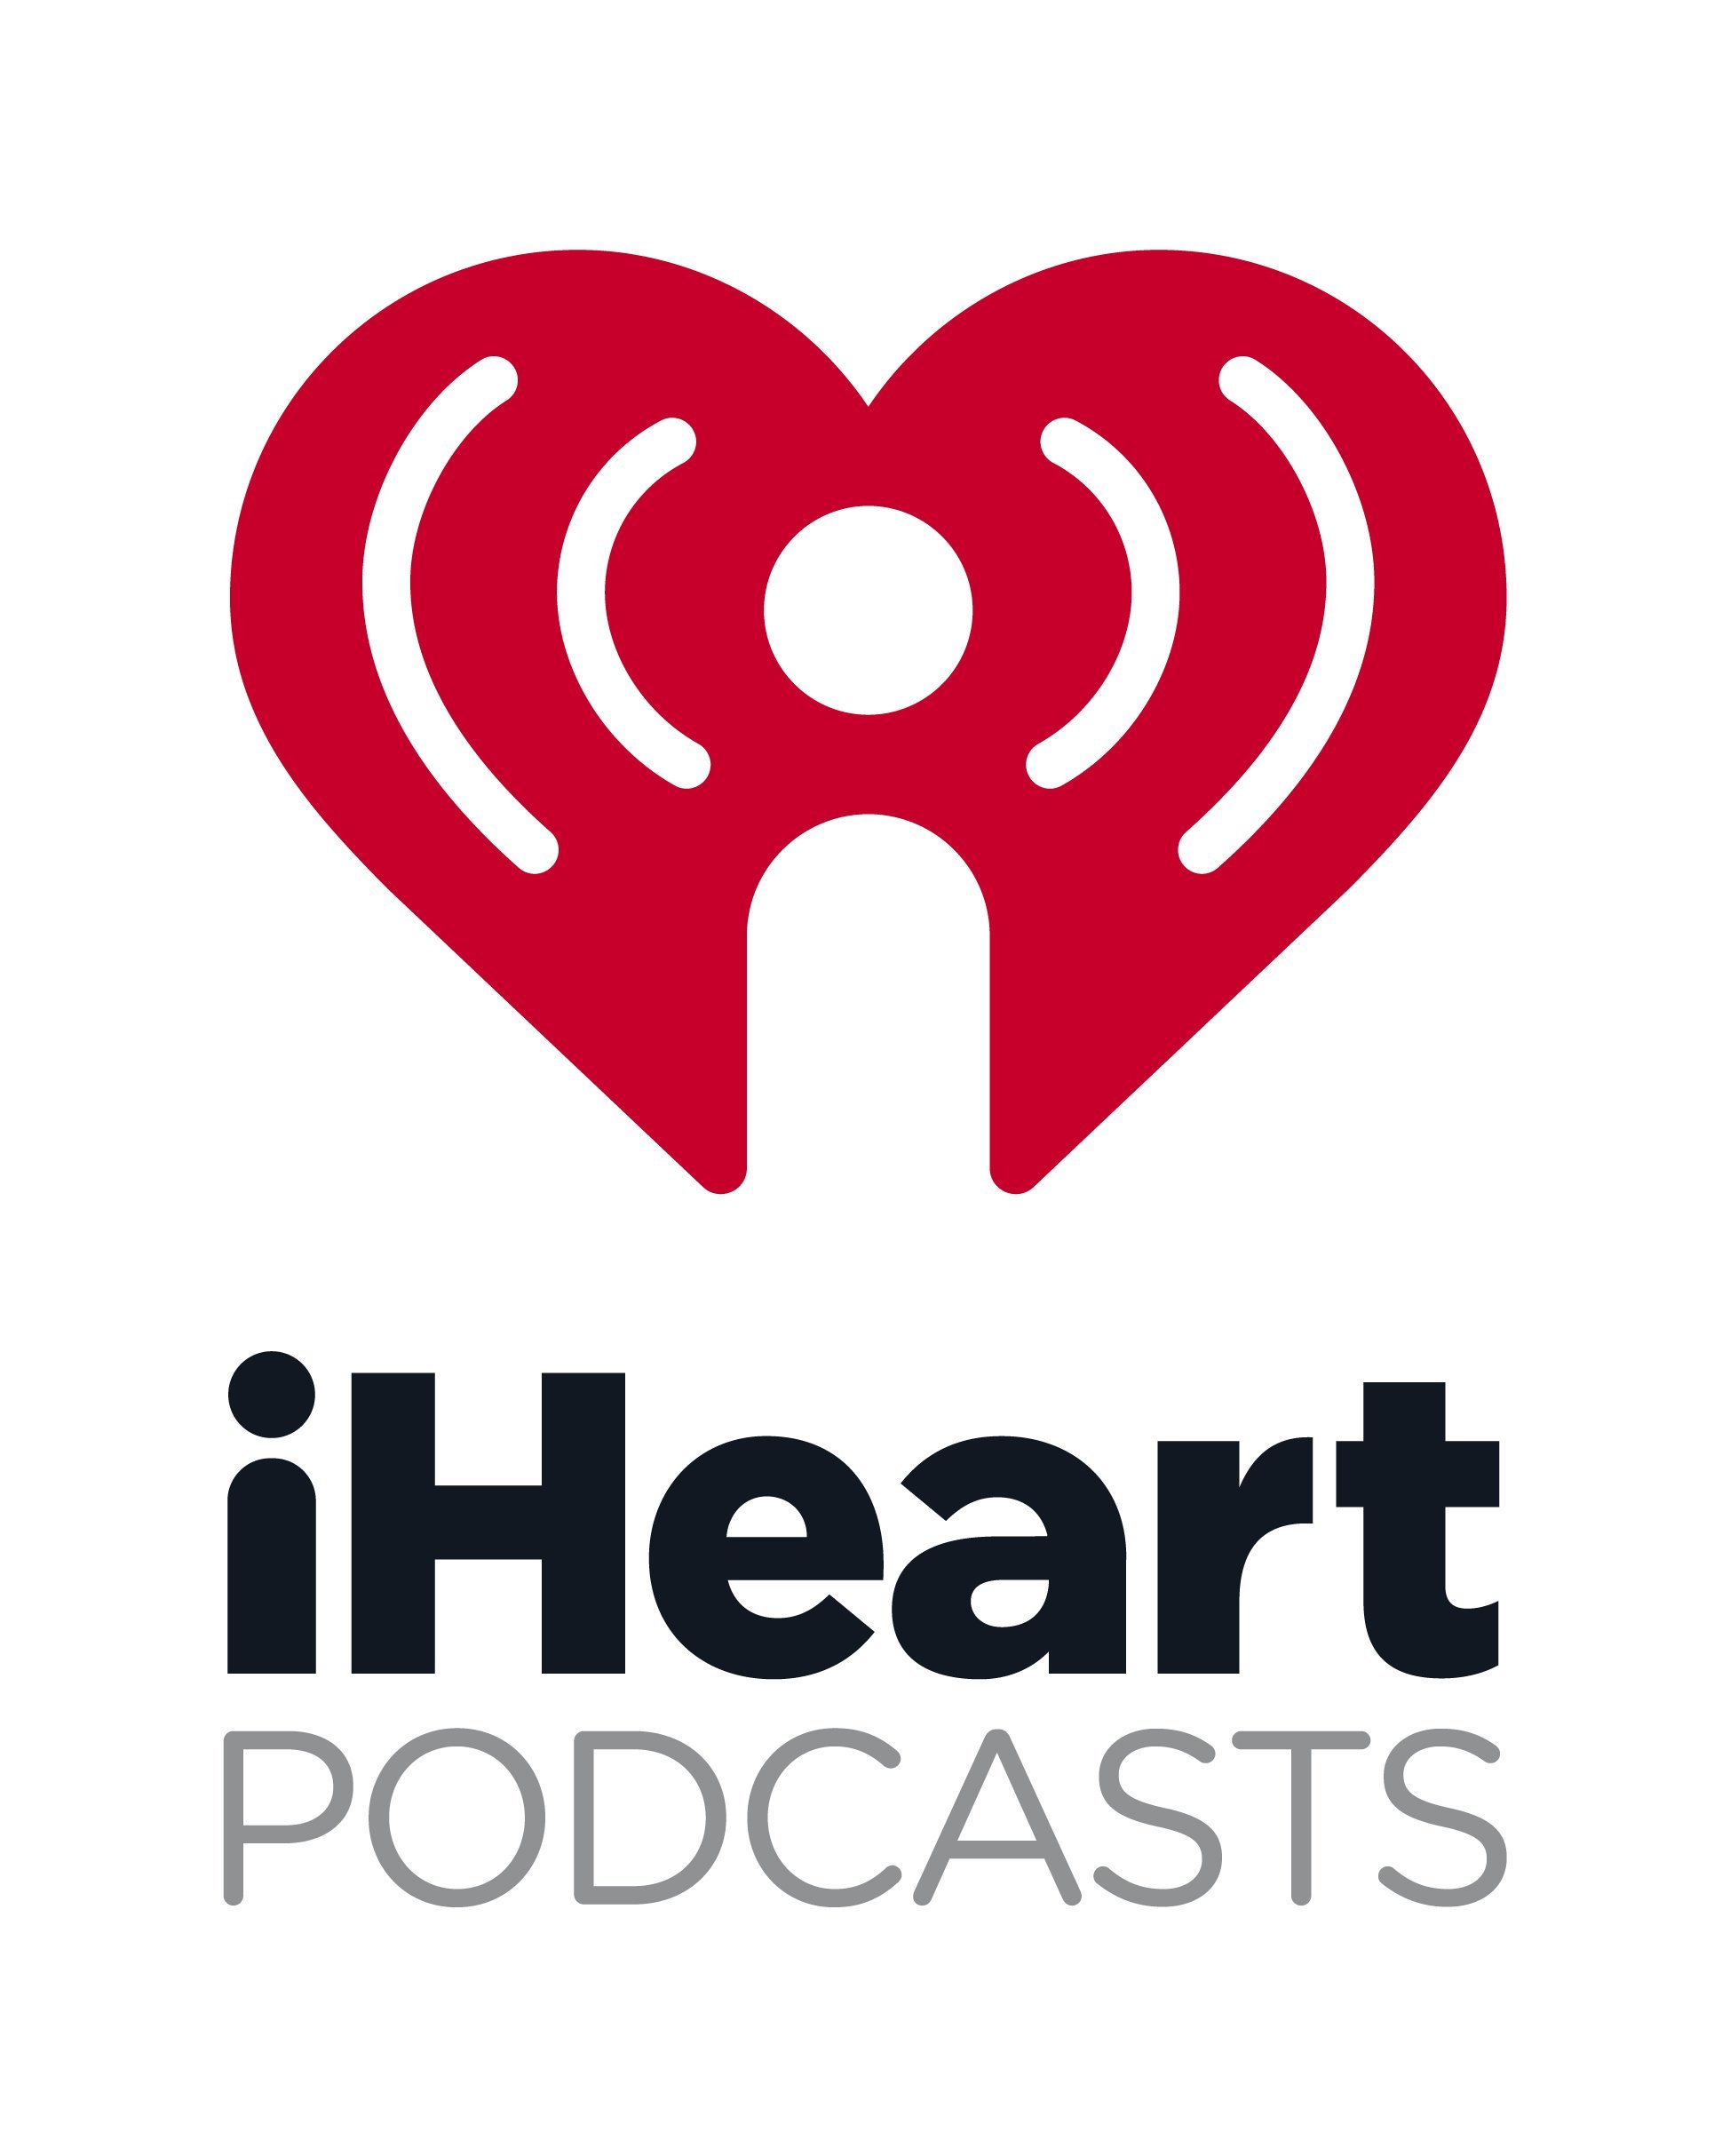 The Irish Expat Podcast on iHeart Podcasts